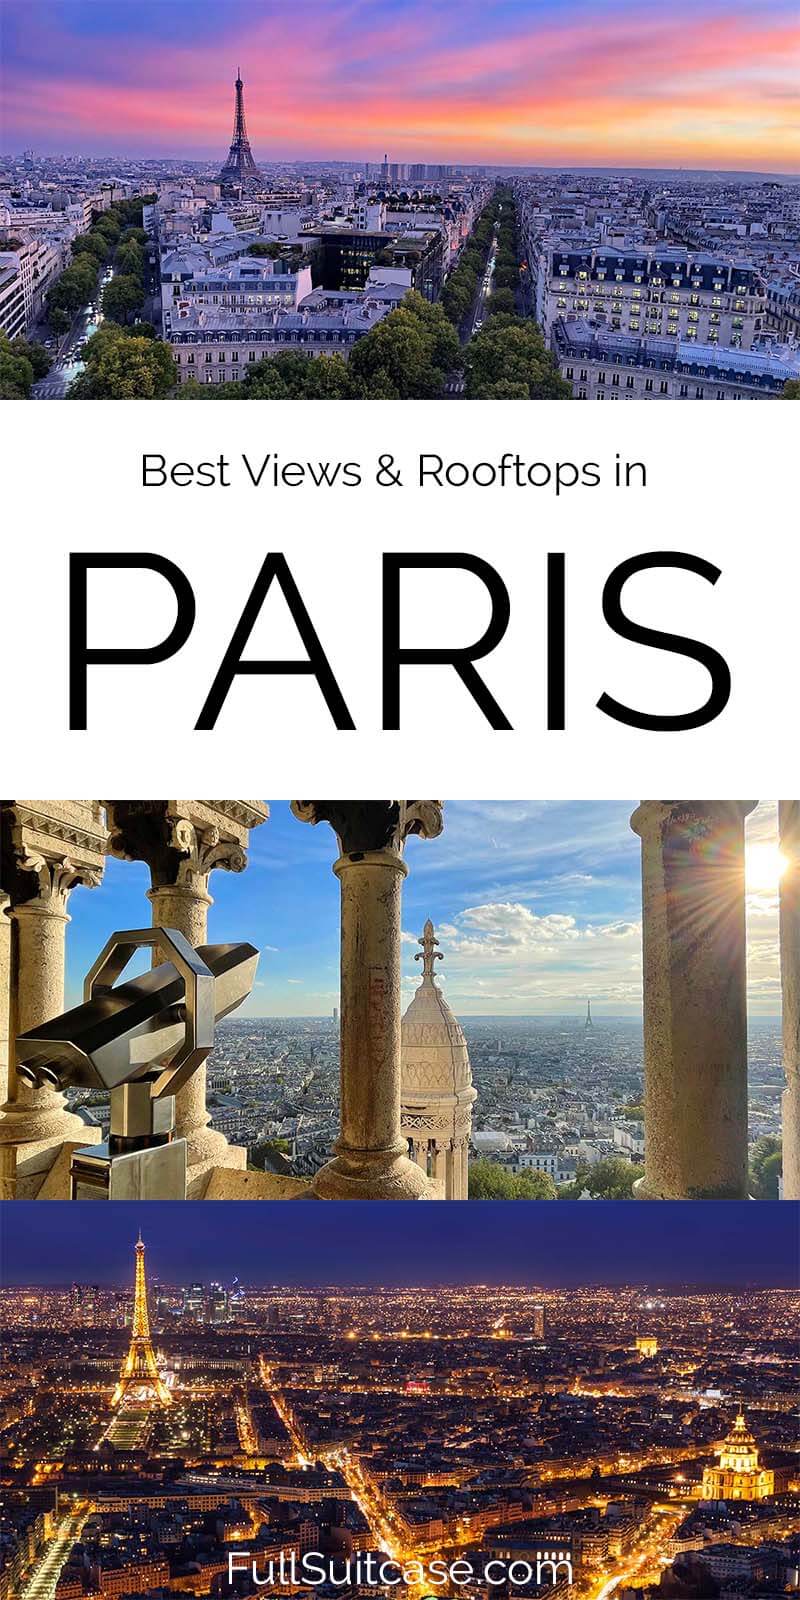 Best panoramic views and viewpoints in Paris